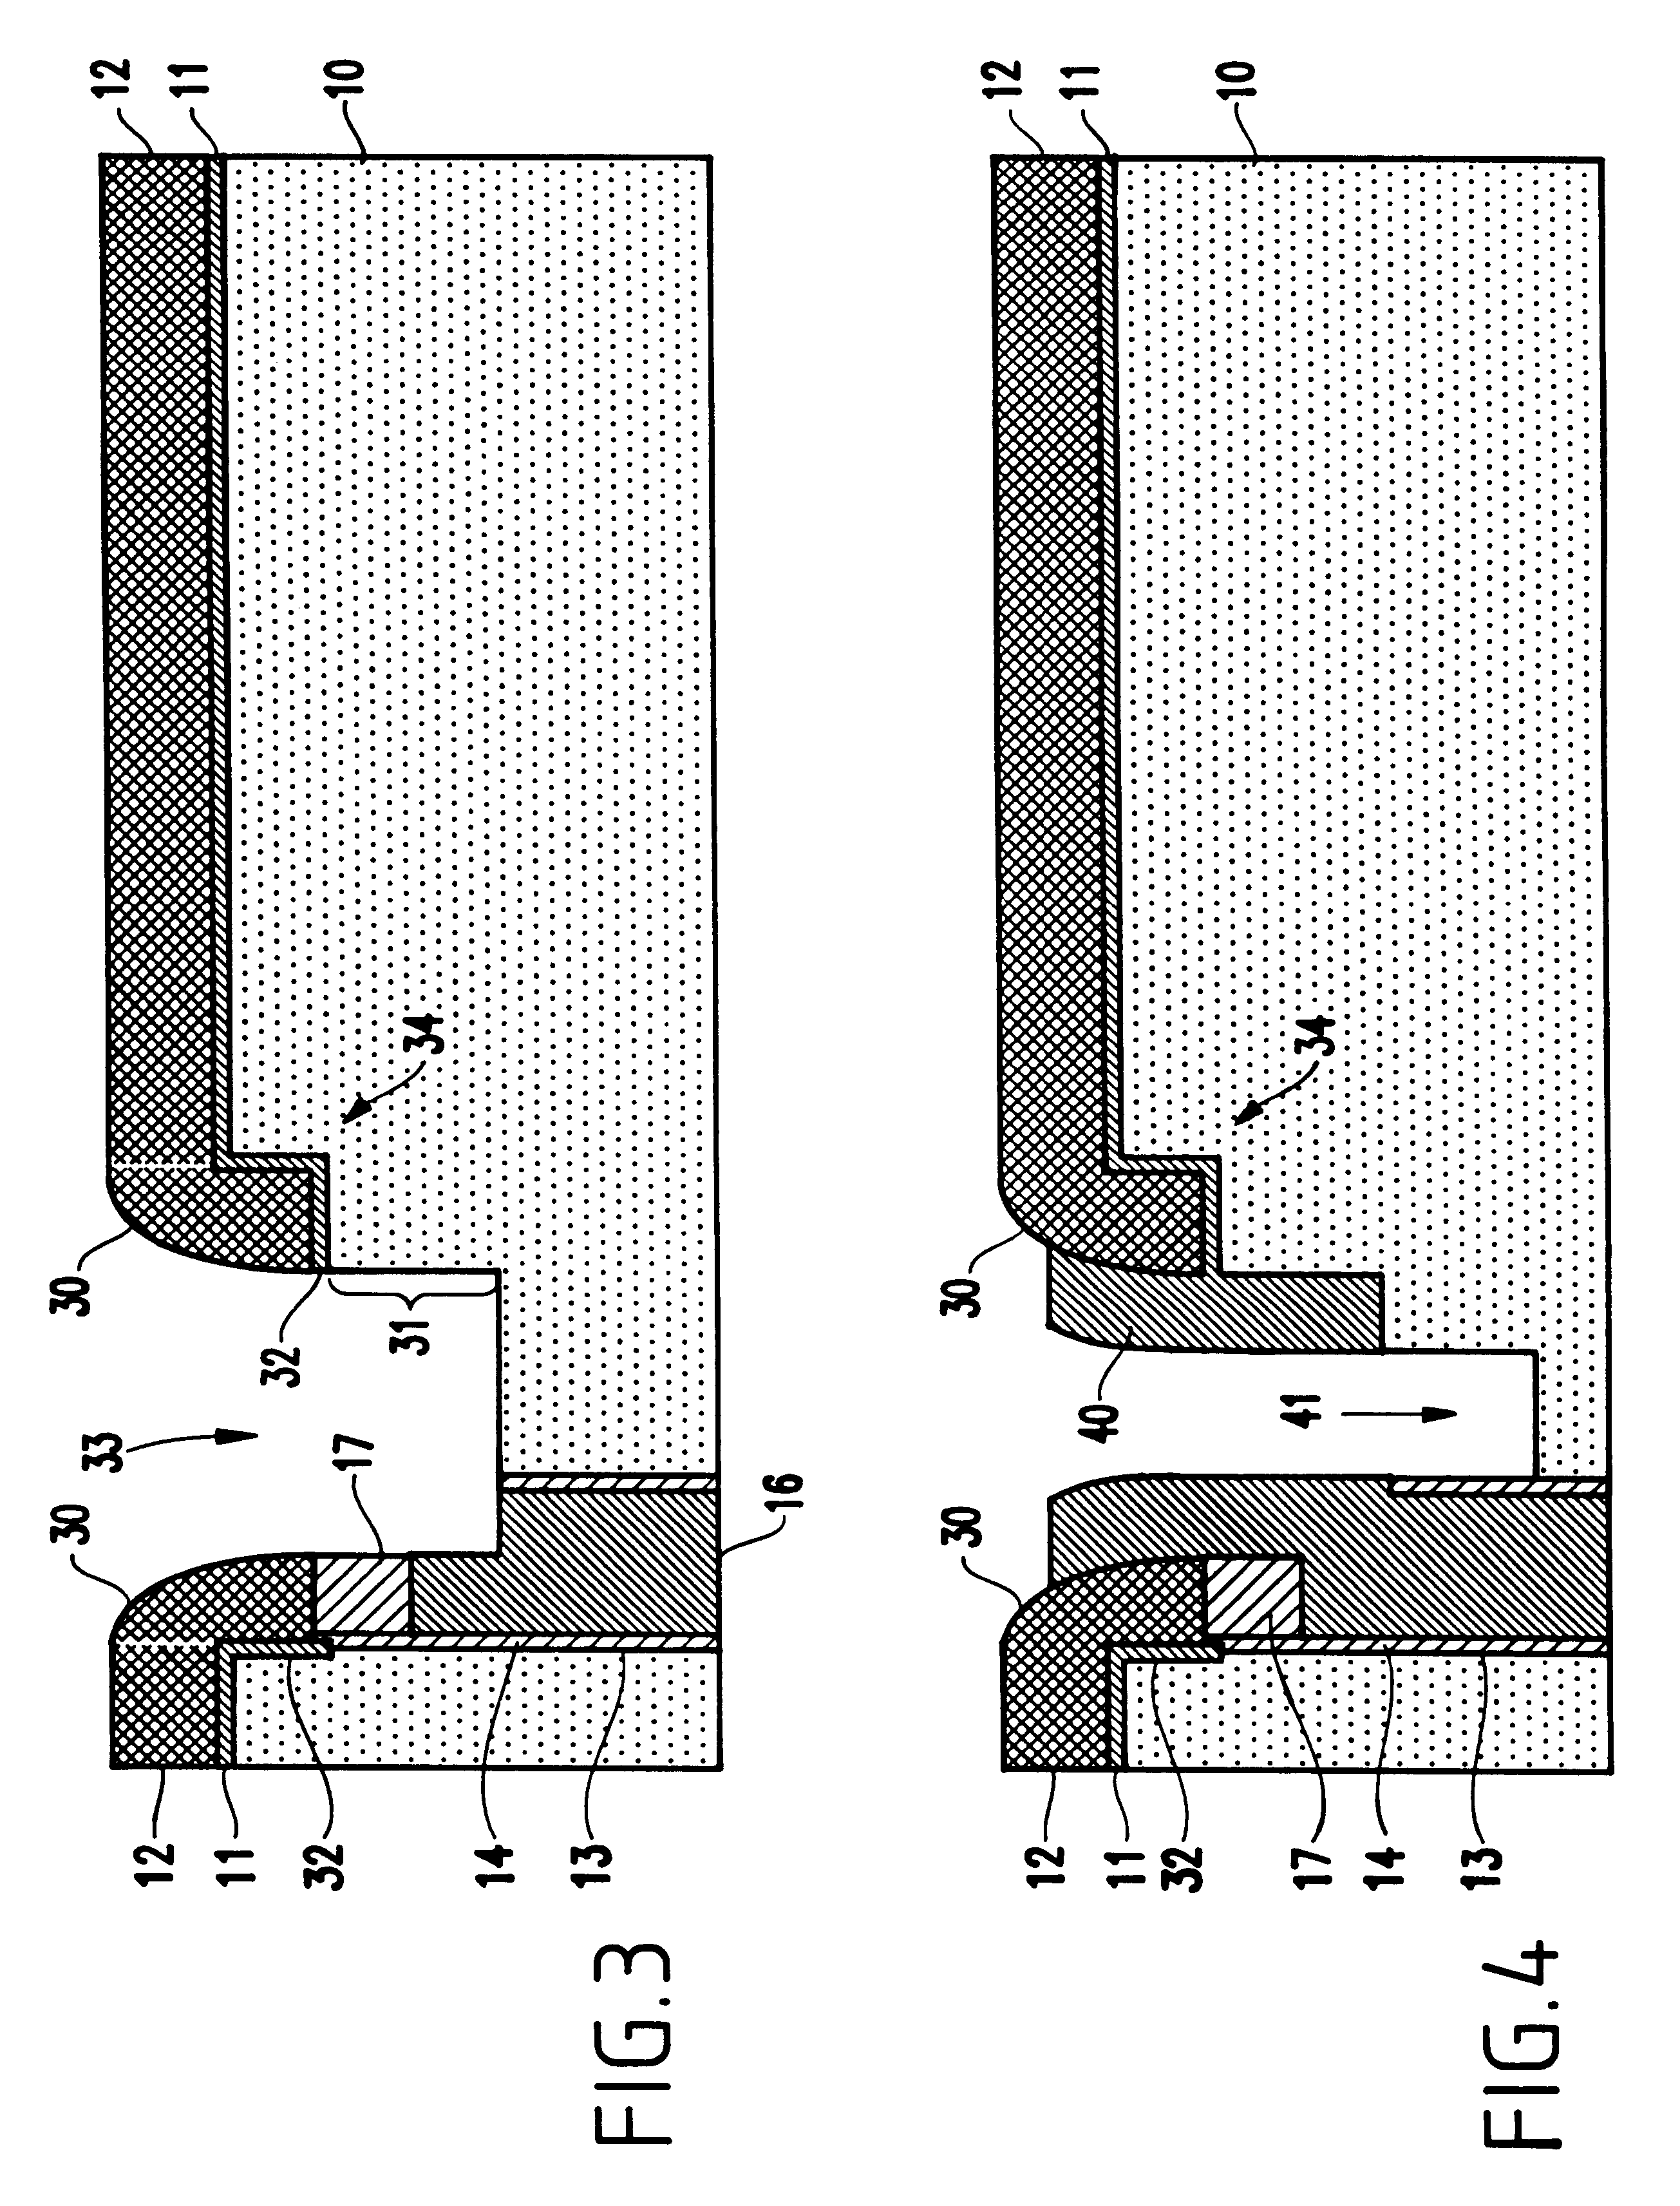 Formation of 5F2 cell with partially vertical transistor and gate conductor aligned buried strap with raised shallow trench isolation region